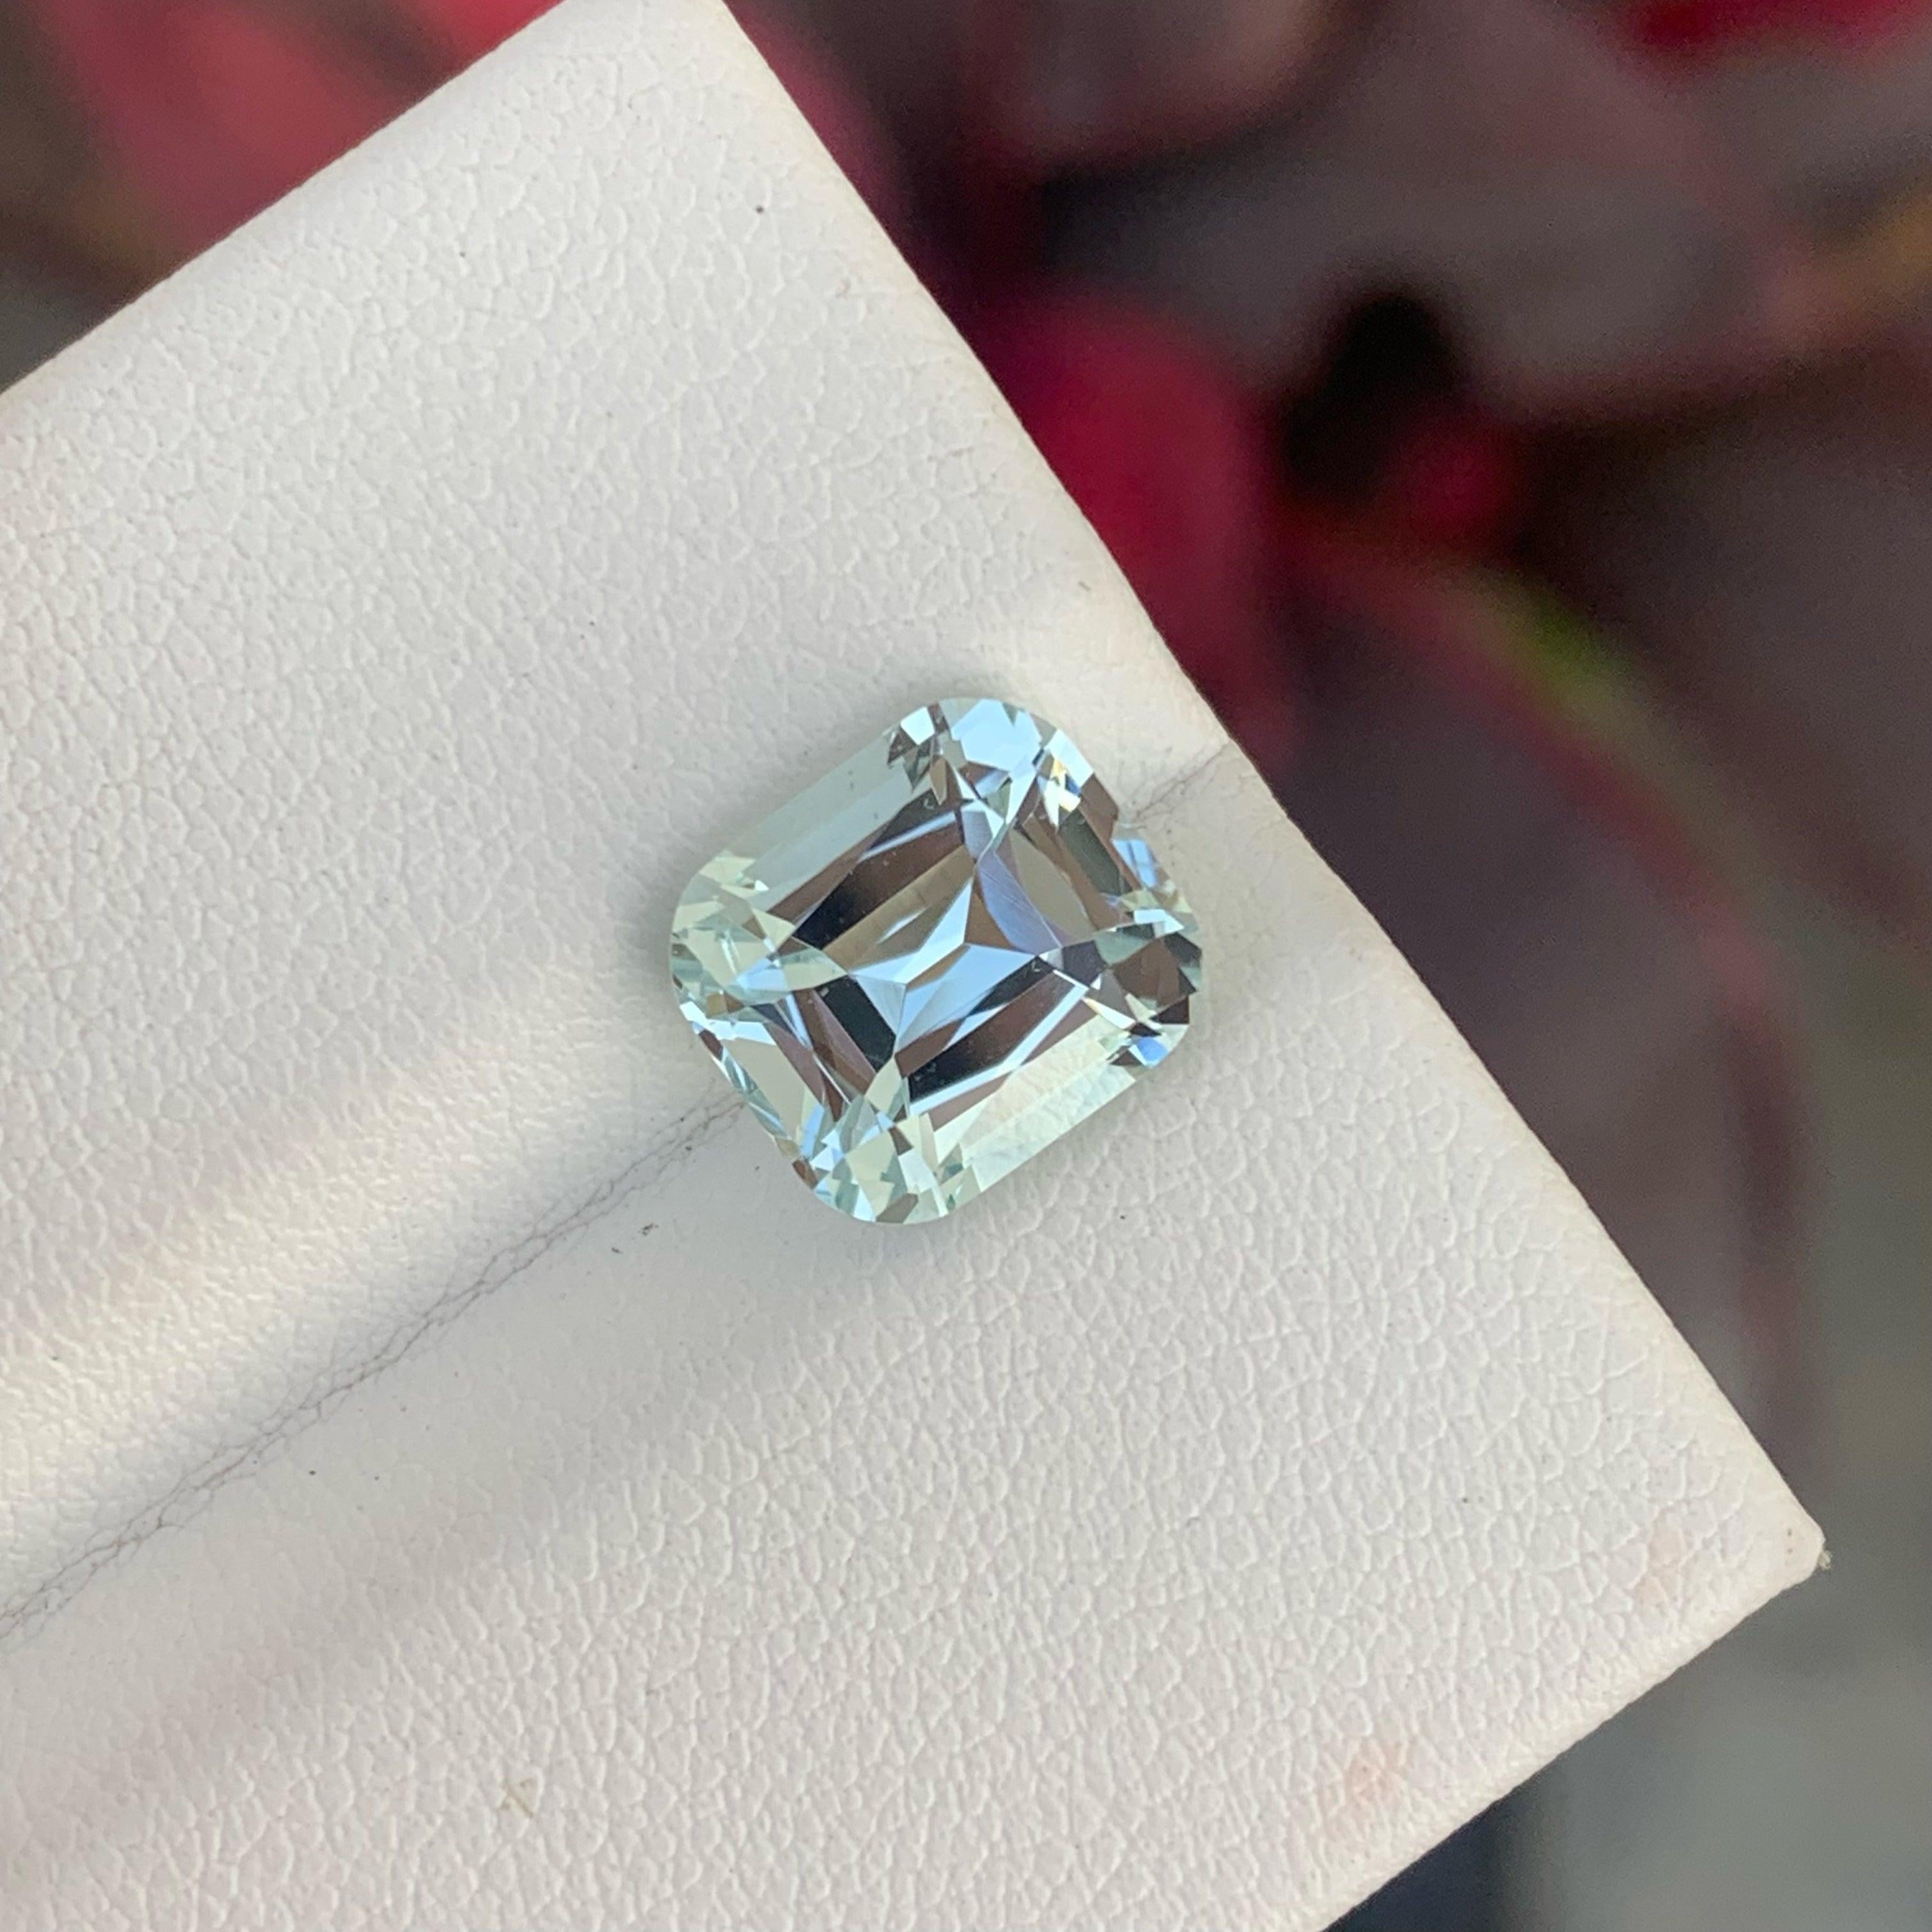 Lovely LightBlue Aquamarine Loose Gemstone, available for sale at wholesale price natural high quality 3.60 Carats Loupe Clean Clarity Loose Aquamarine from Pakistan.

Product Information:
GEMSTONE NAME:	Lovely LightBlue Aquamarine Loose